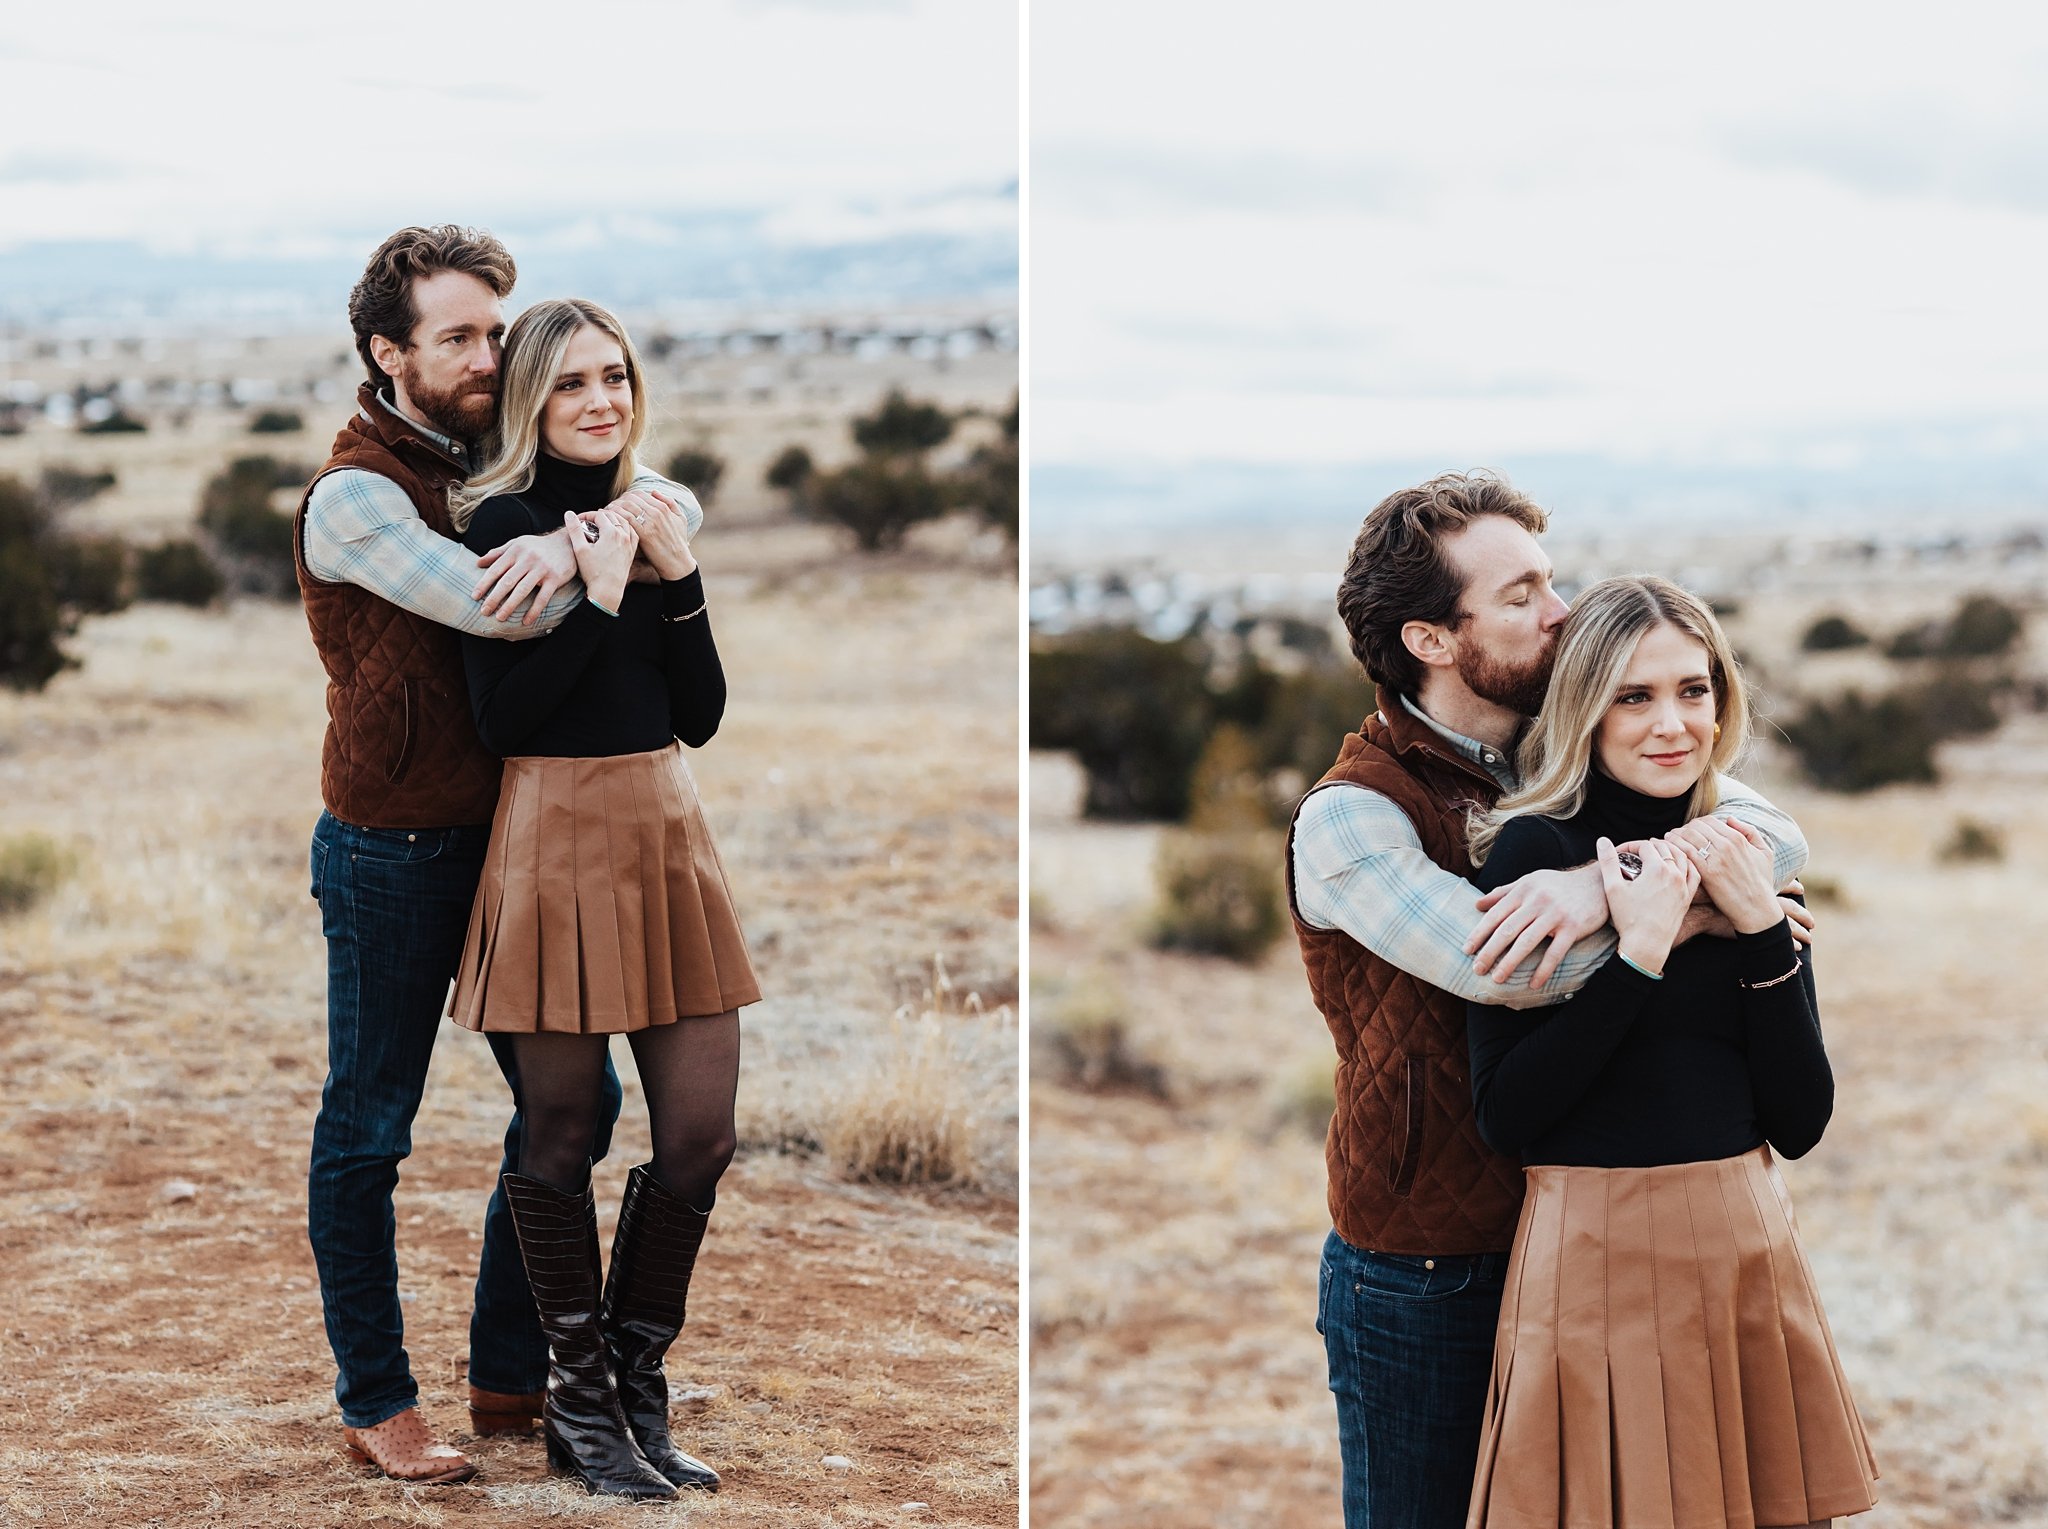 Alicia+lucia+photography+-+albuquerque+wedding+photographer+-+santa+fe+wedding+photography+-+new+mexico+wedding+photographer+-+new+mexico+wedding+-+southwest+engagement+-+ghost+ranch+engagement+-+ghost+ranch+wedding_0082.jpg